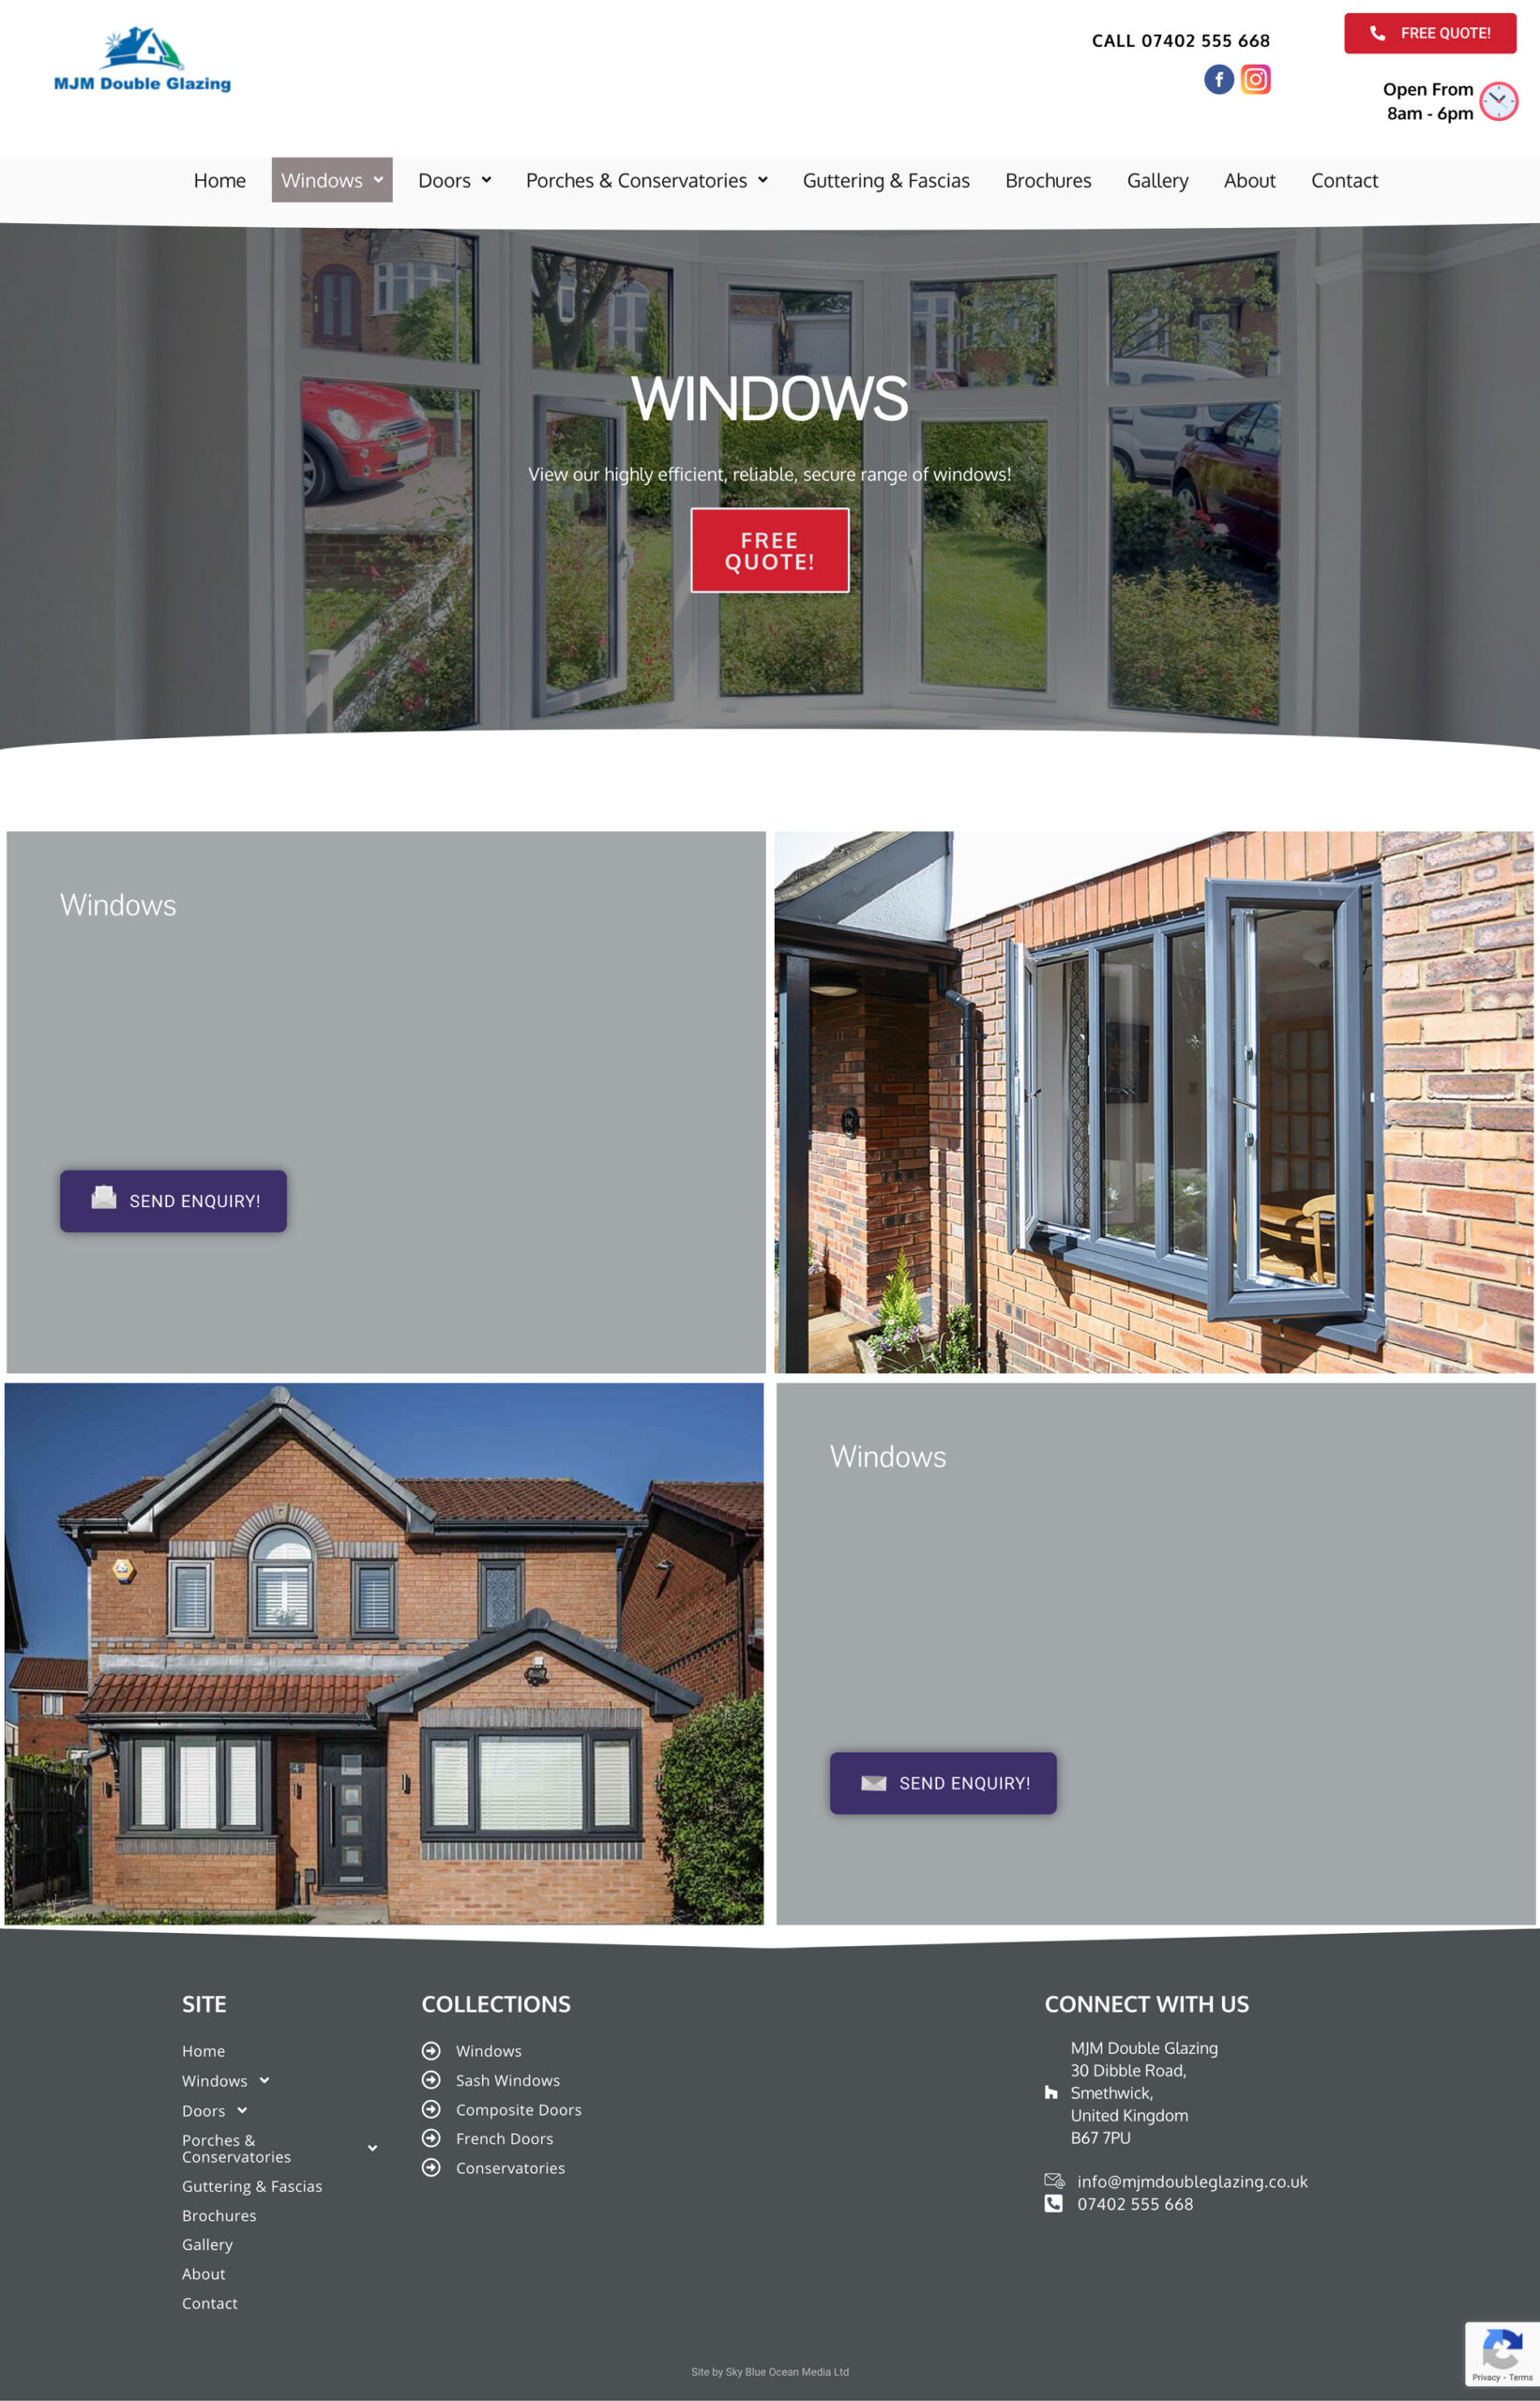 JM Double Glazing Client's Products page Mockup